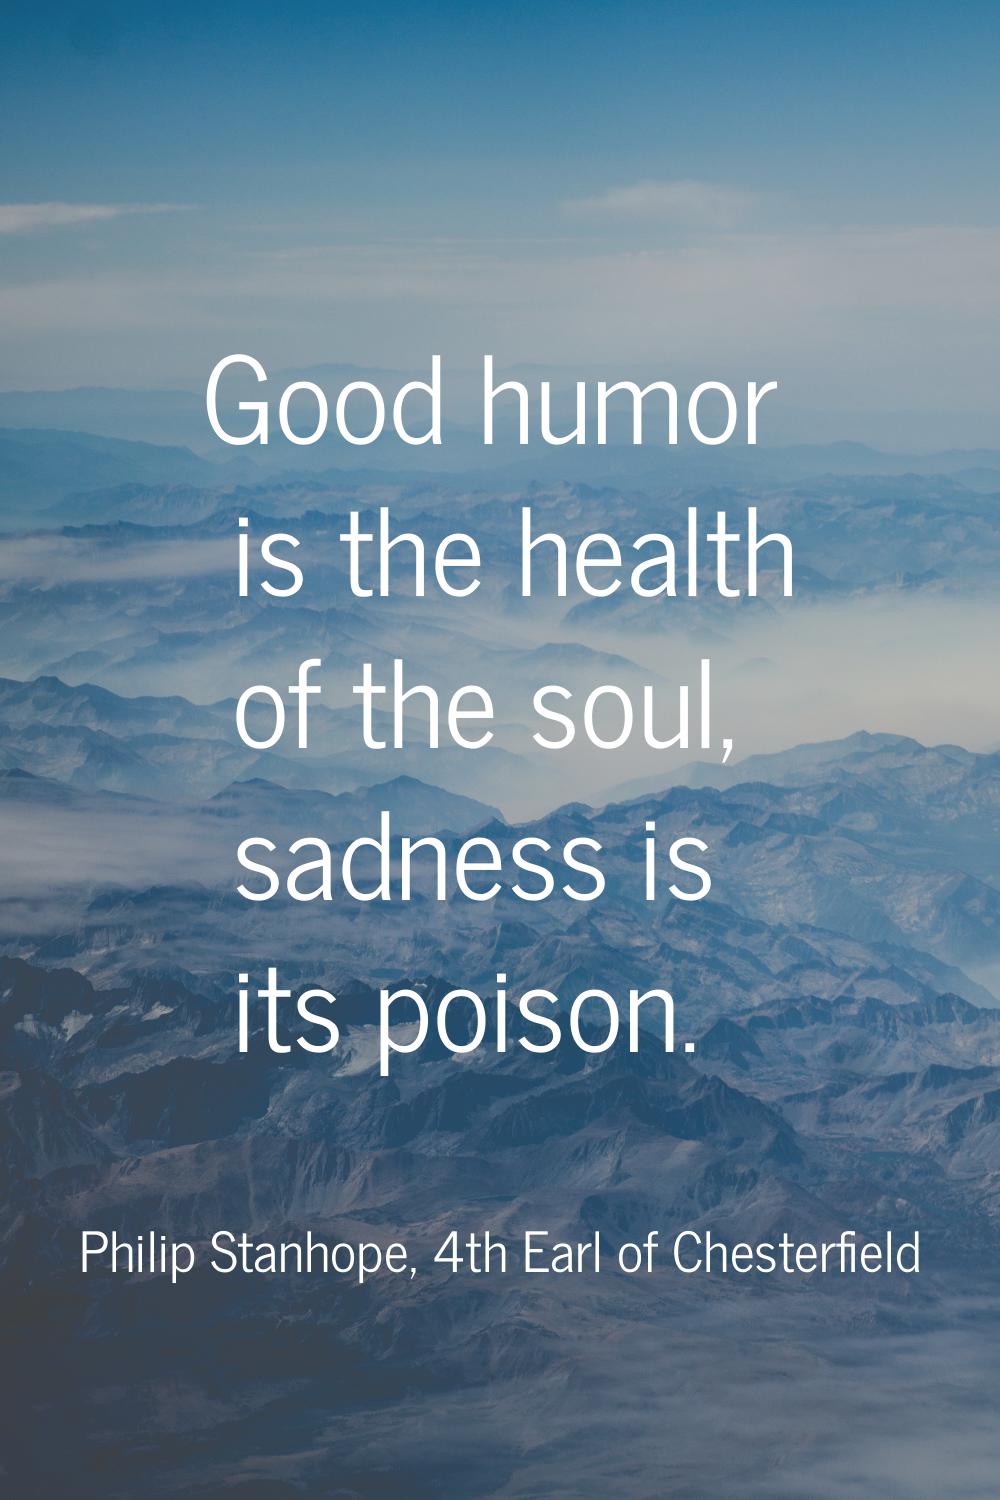 Good humor is the health of the soul, sadness is its poison.